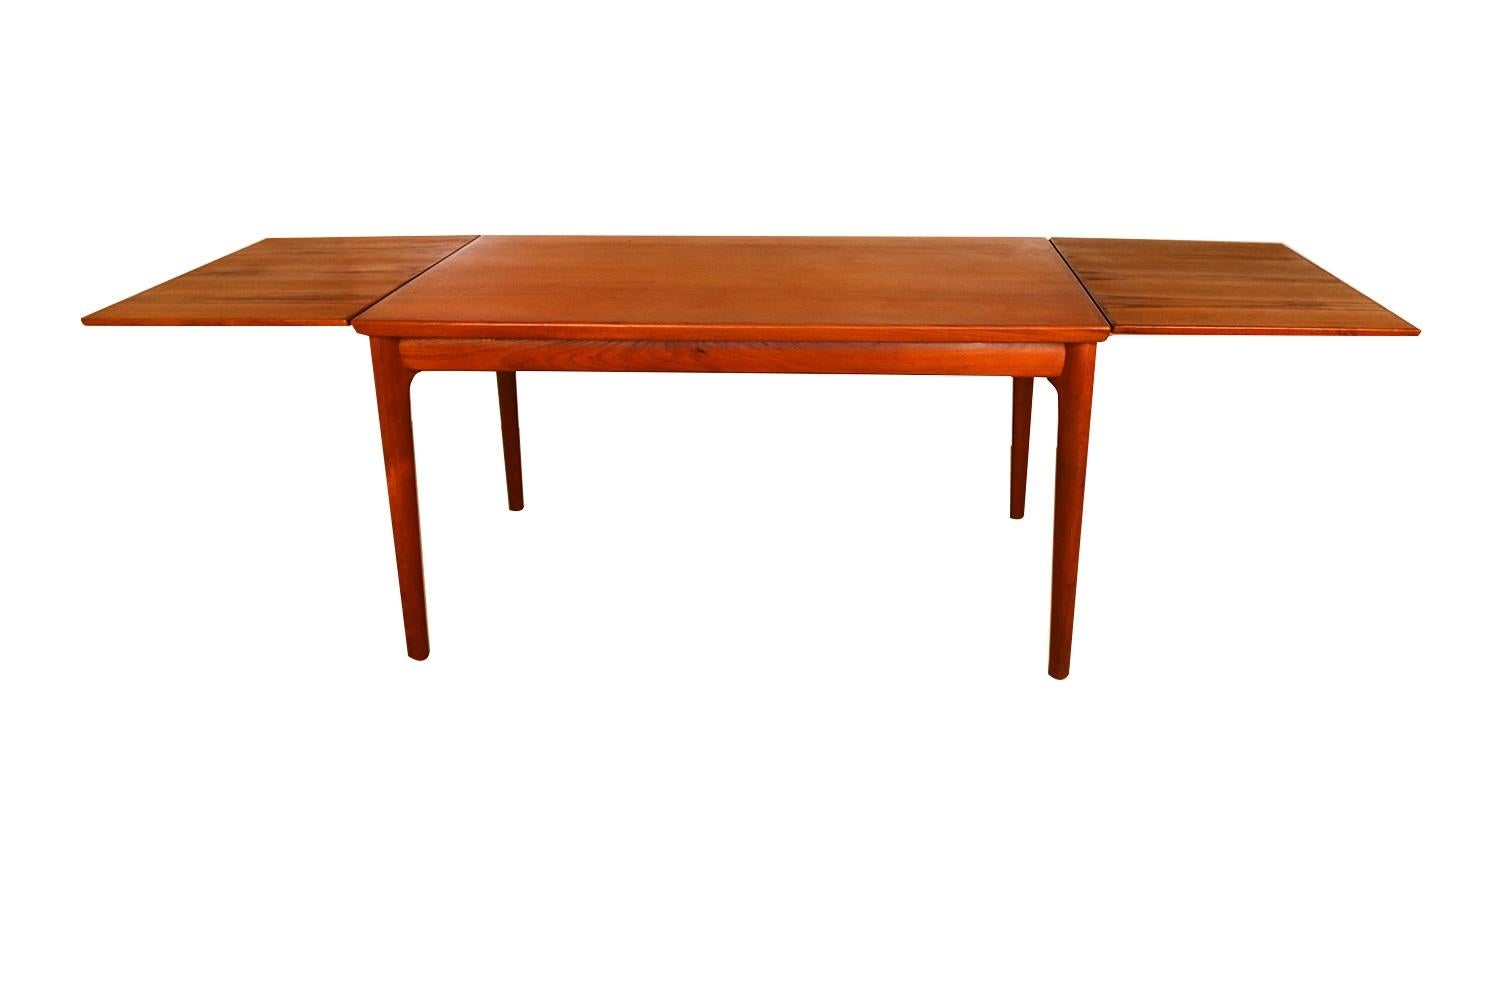 Exceptional Danish modern teak extension dining table. This gorgeous Danish Teak extending dining table remains in original excellent condition throughout. With an initial medium footprint, this table can also offer a generous space and double in